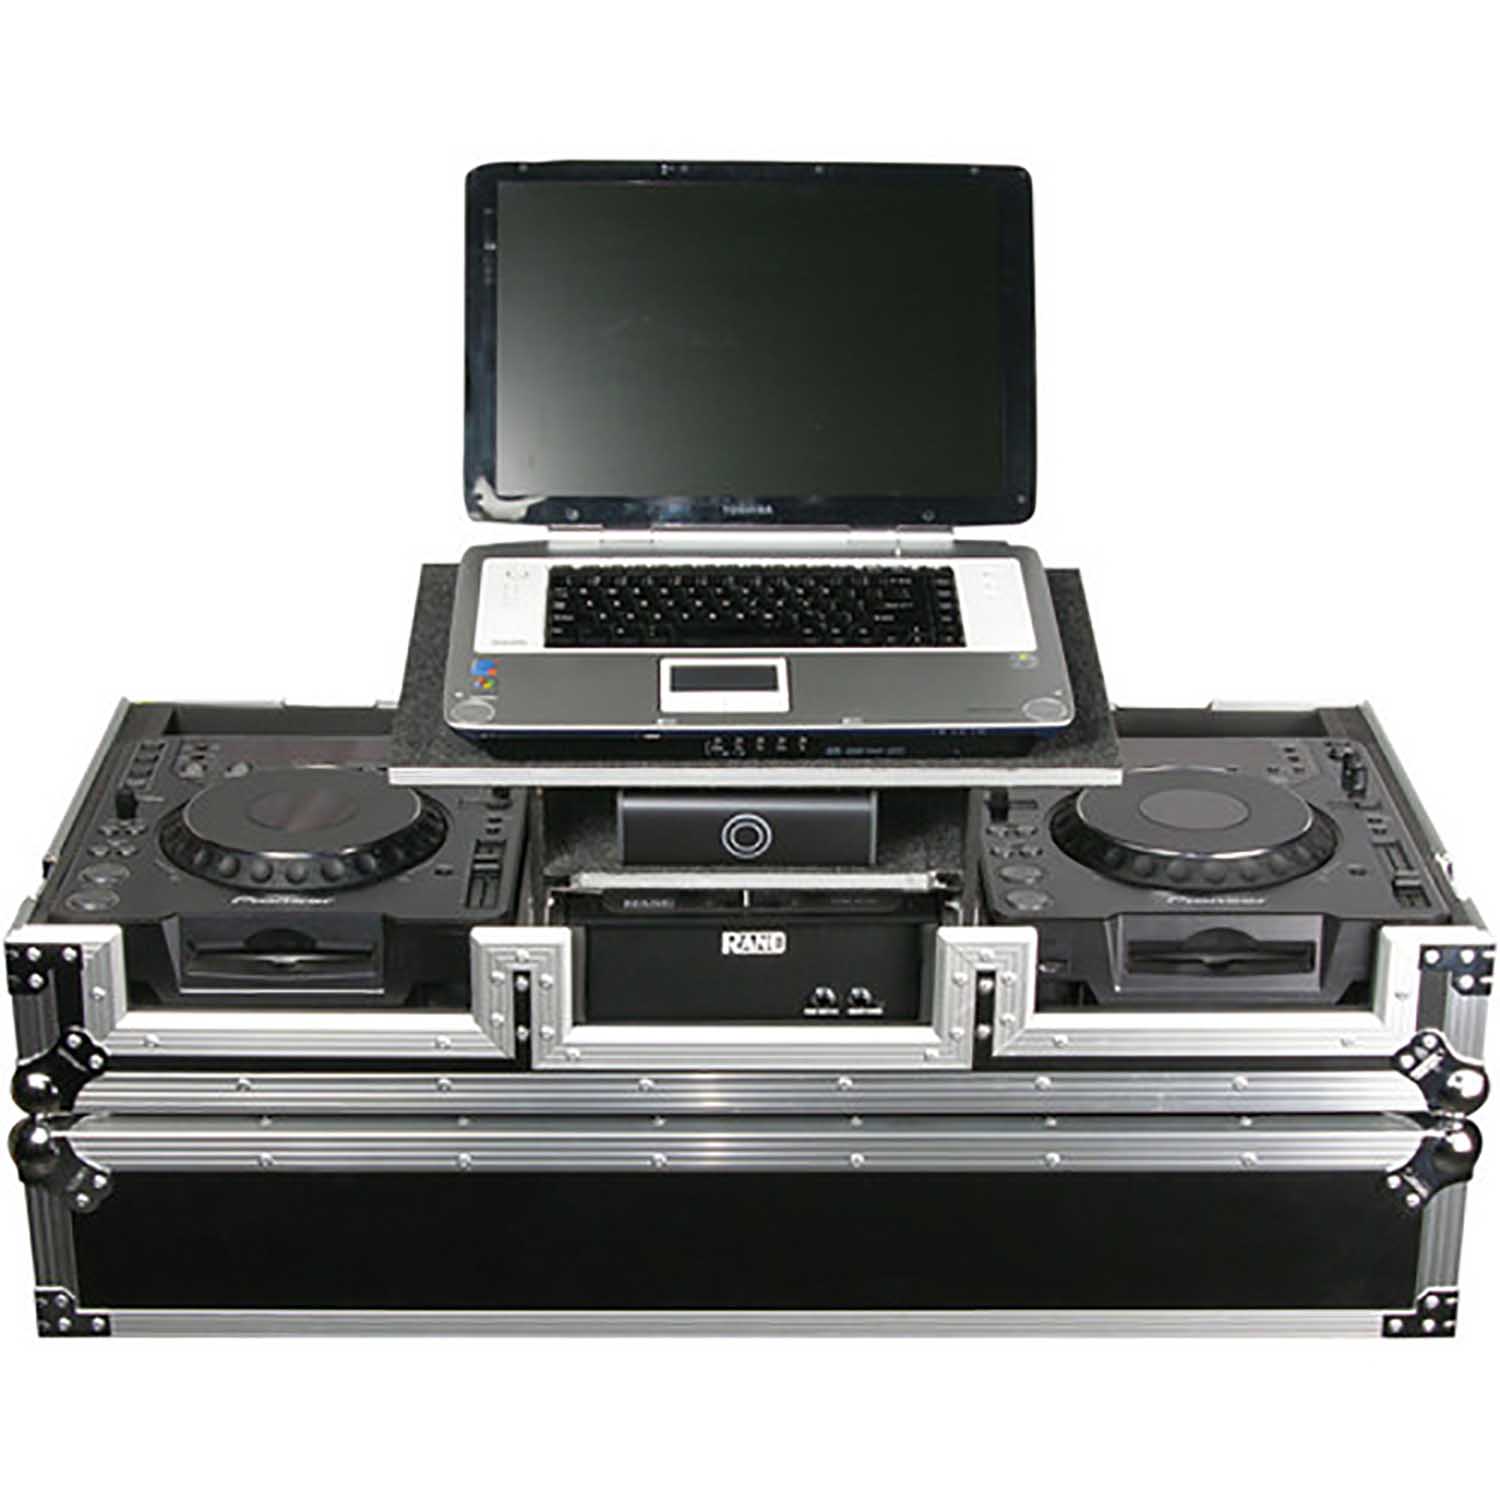 Open Box: Odyssey FZGS10CDJW Glide Style DJ Coffin Case for Laptop and CD Mixer with Wheels - Hollywood DJ